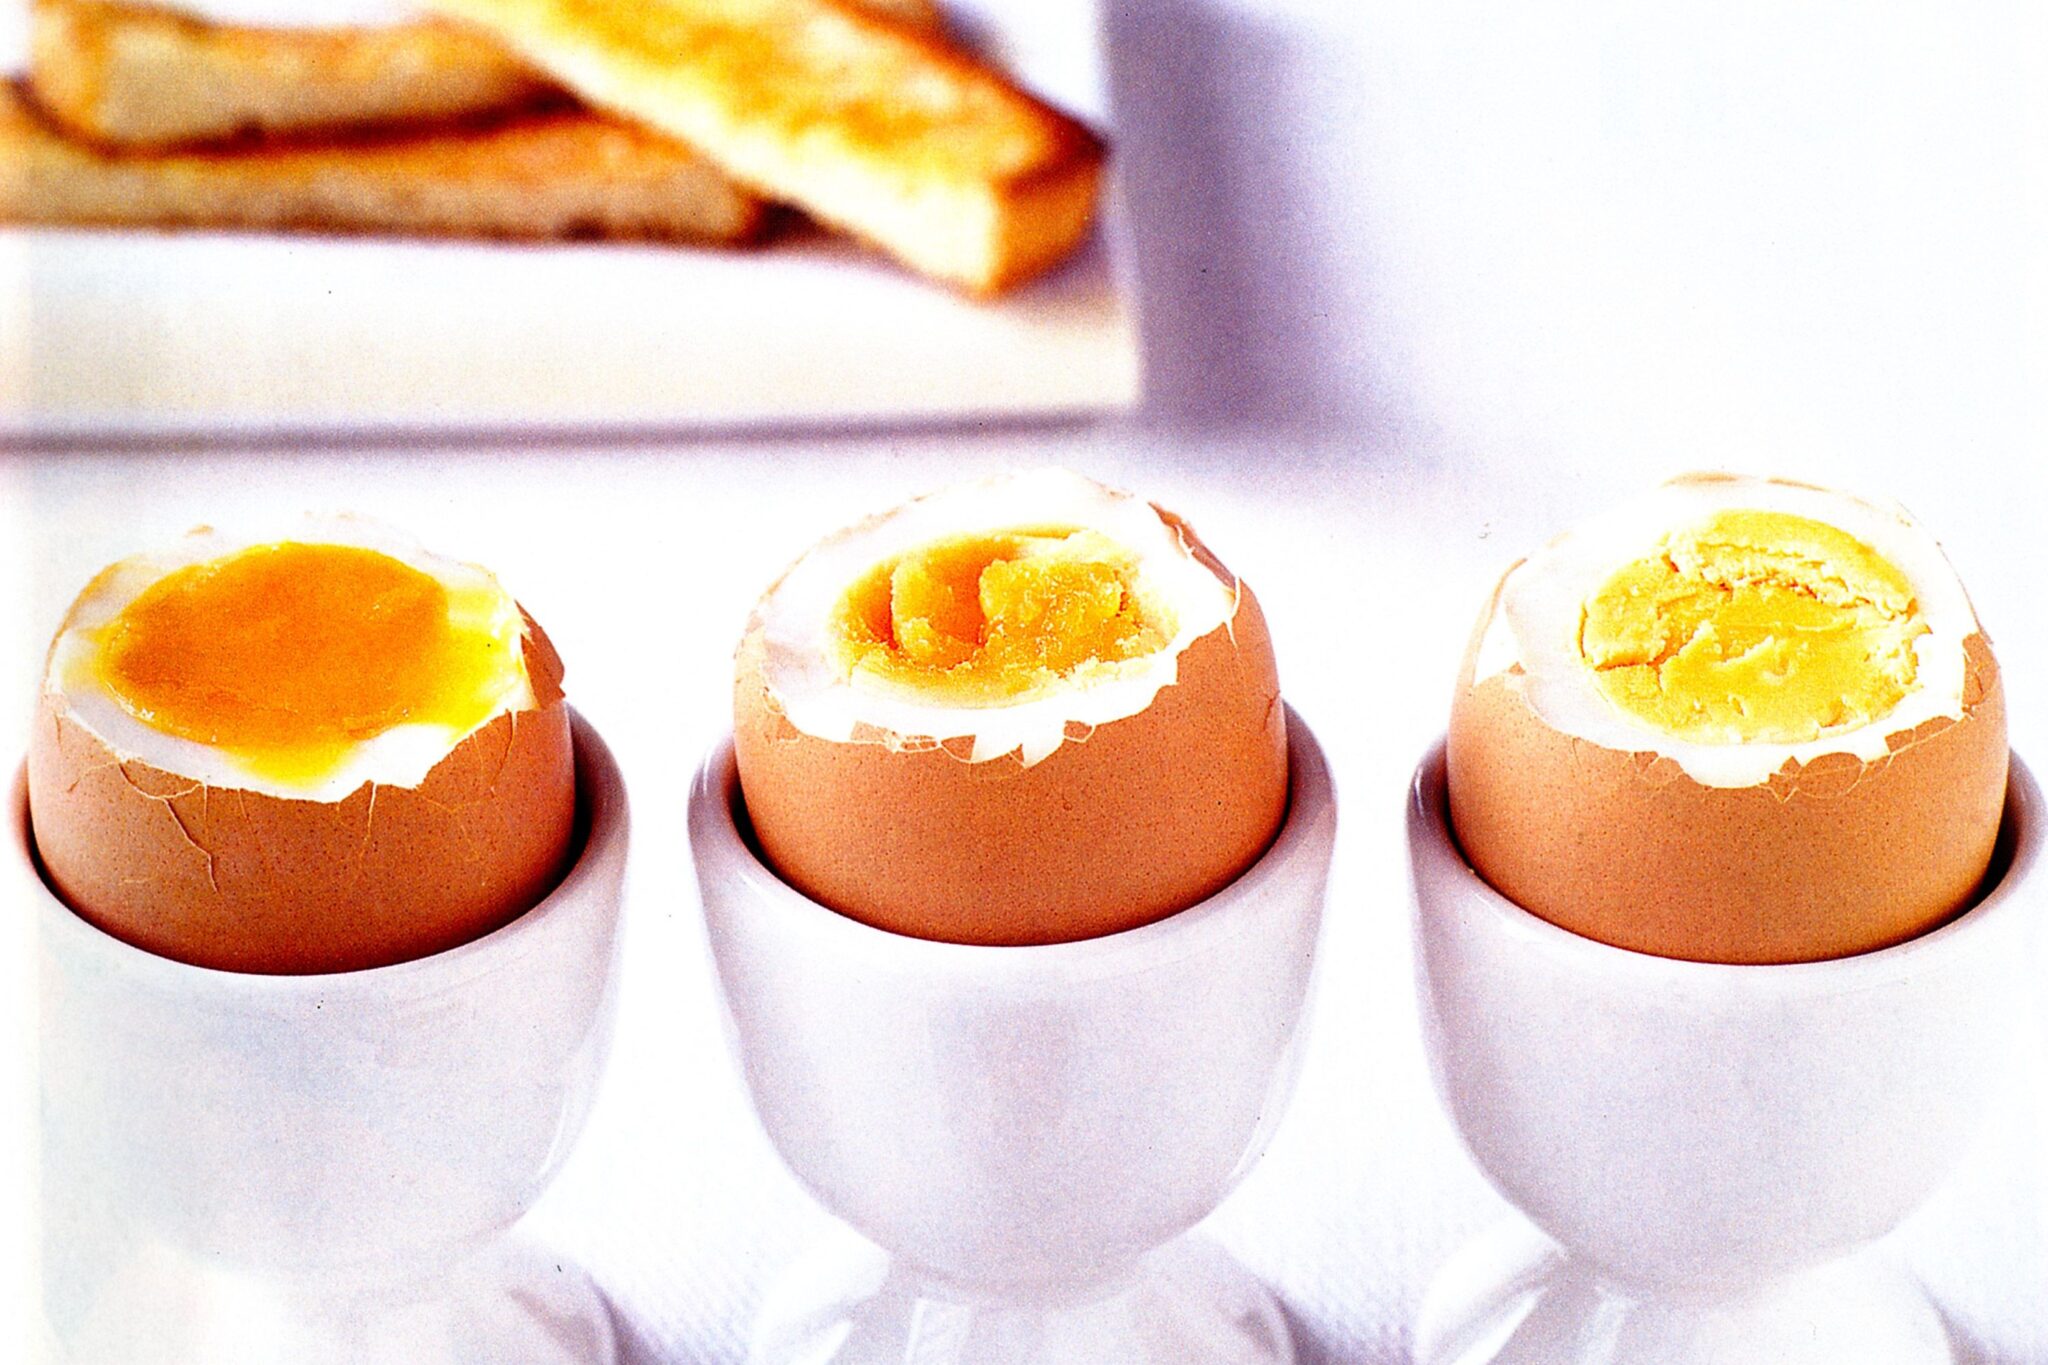 How to make Boiled Eggs and Boiled Eggs Recipes